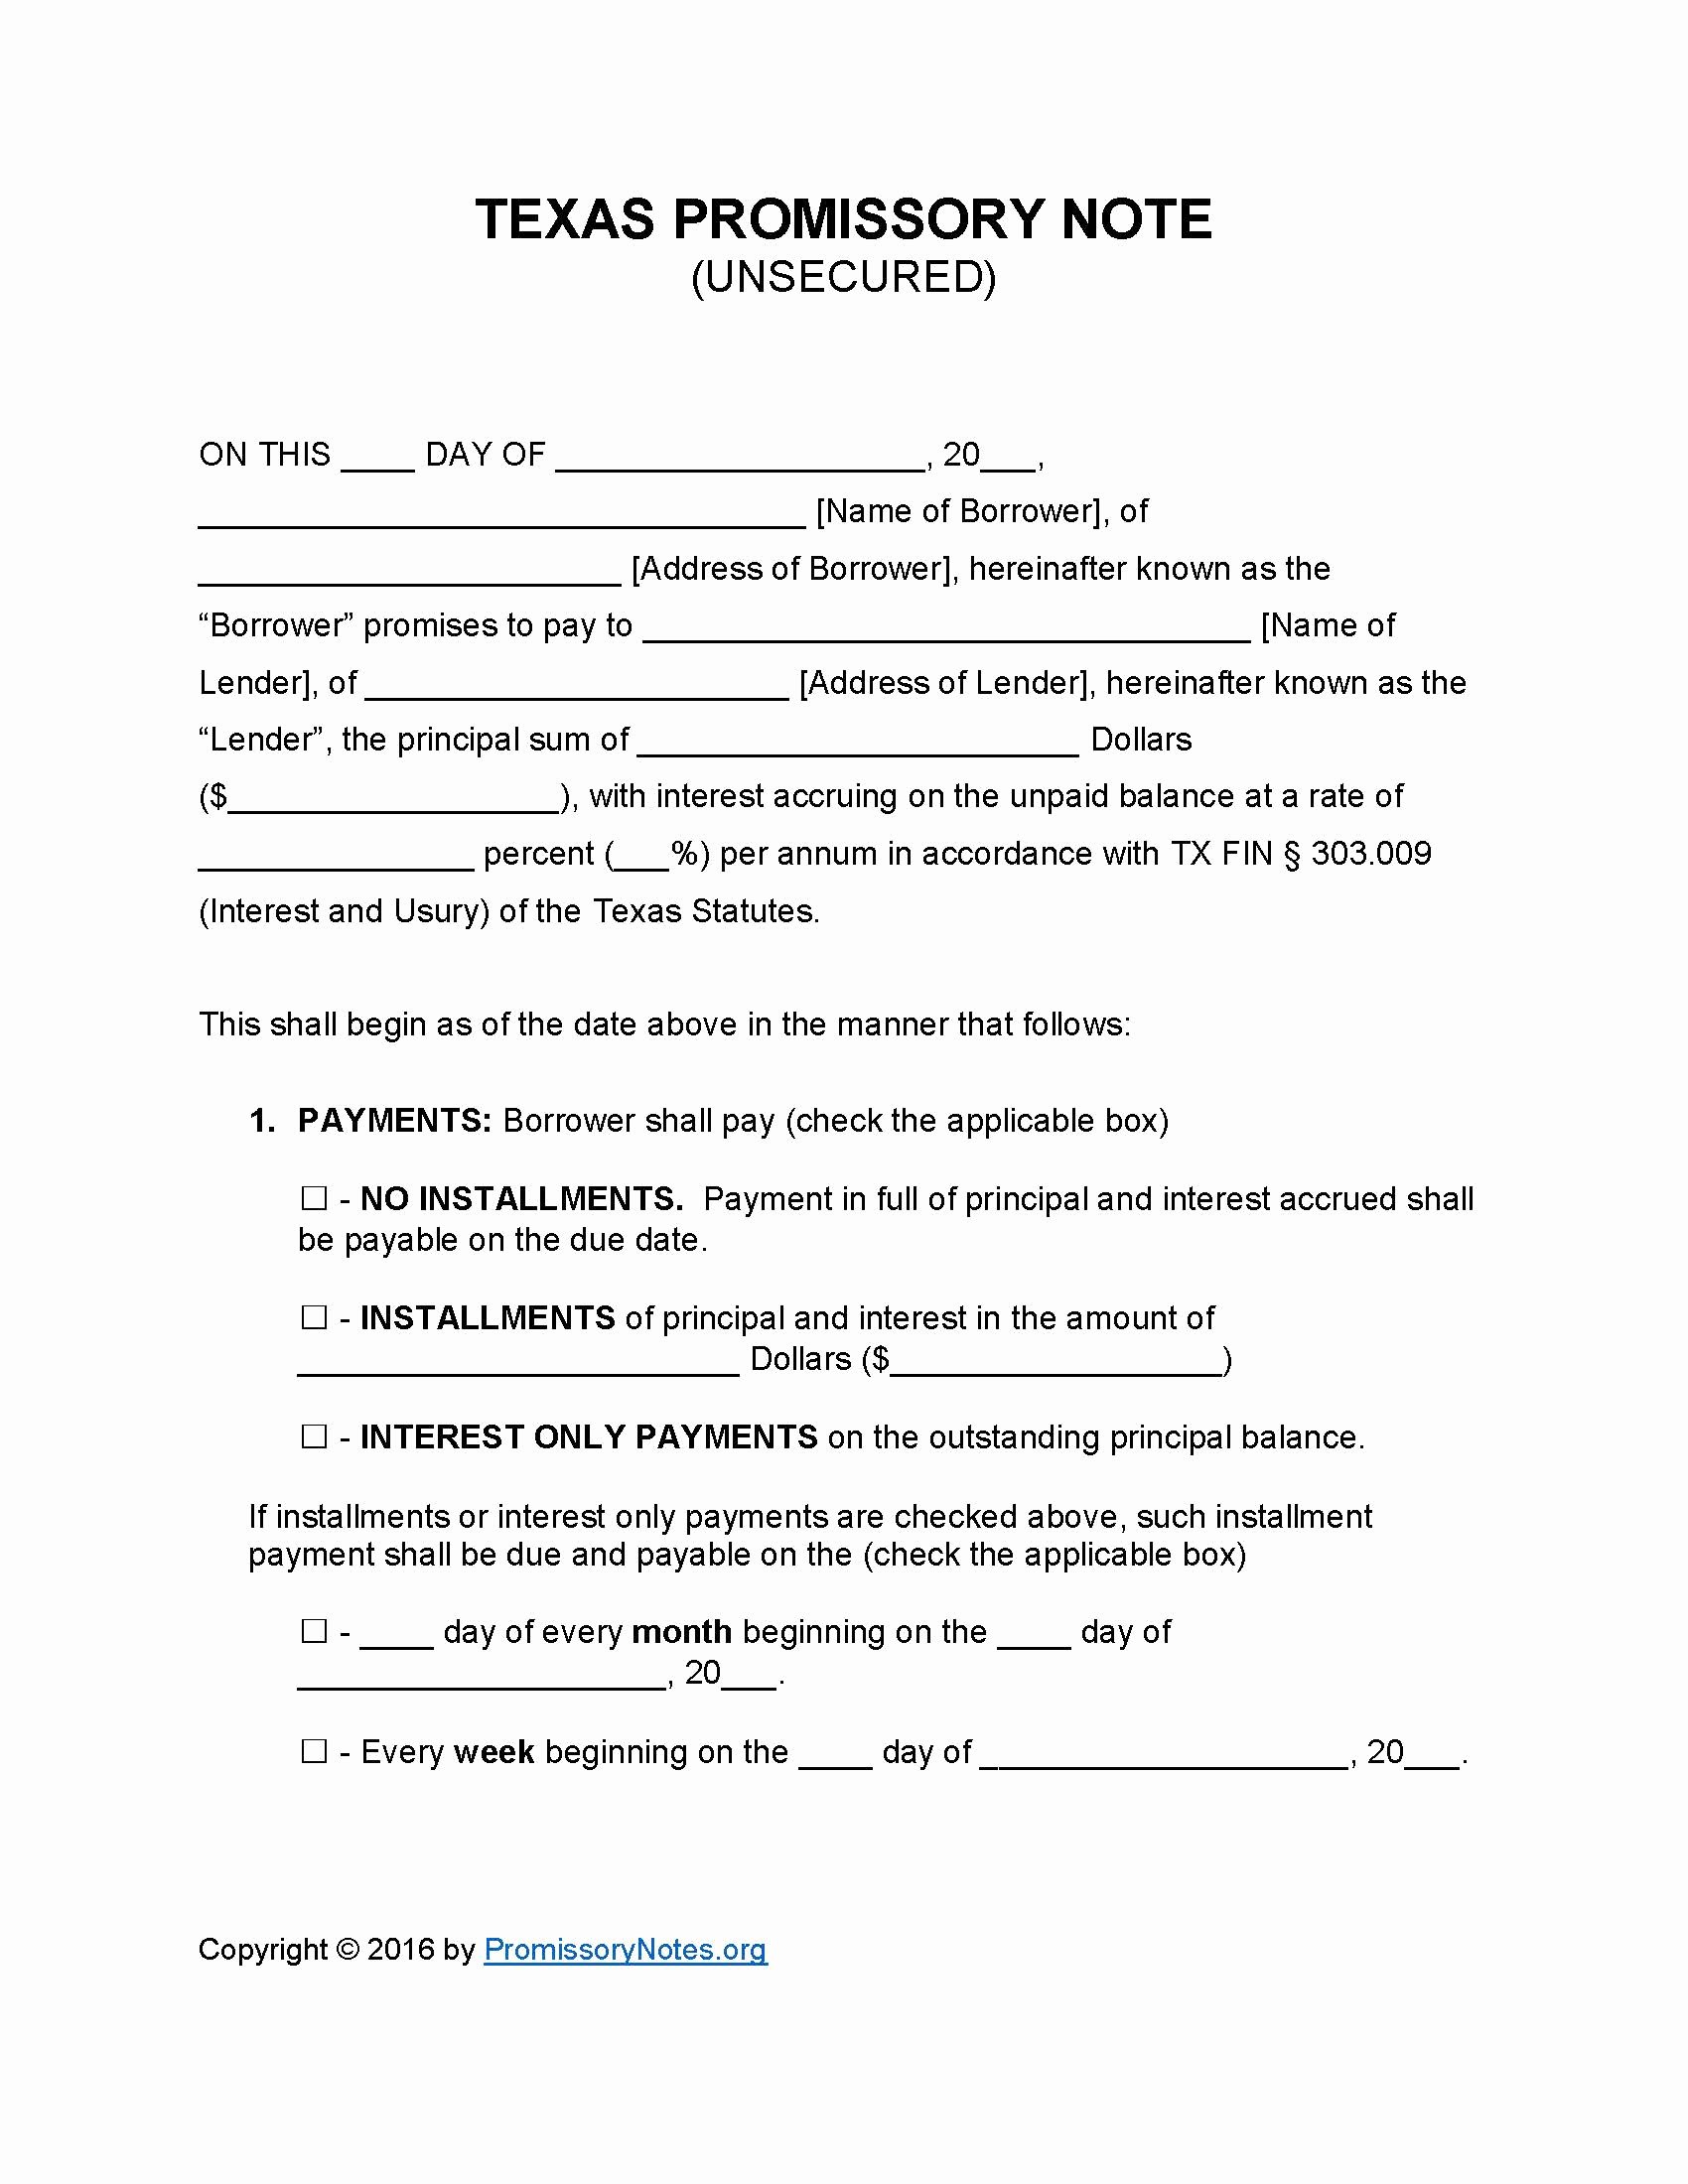 Texas Unsecured Promissory Note Template Promissory